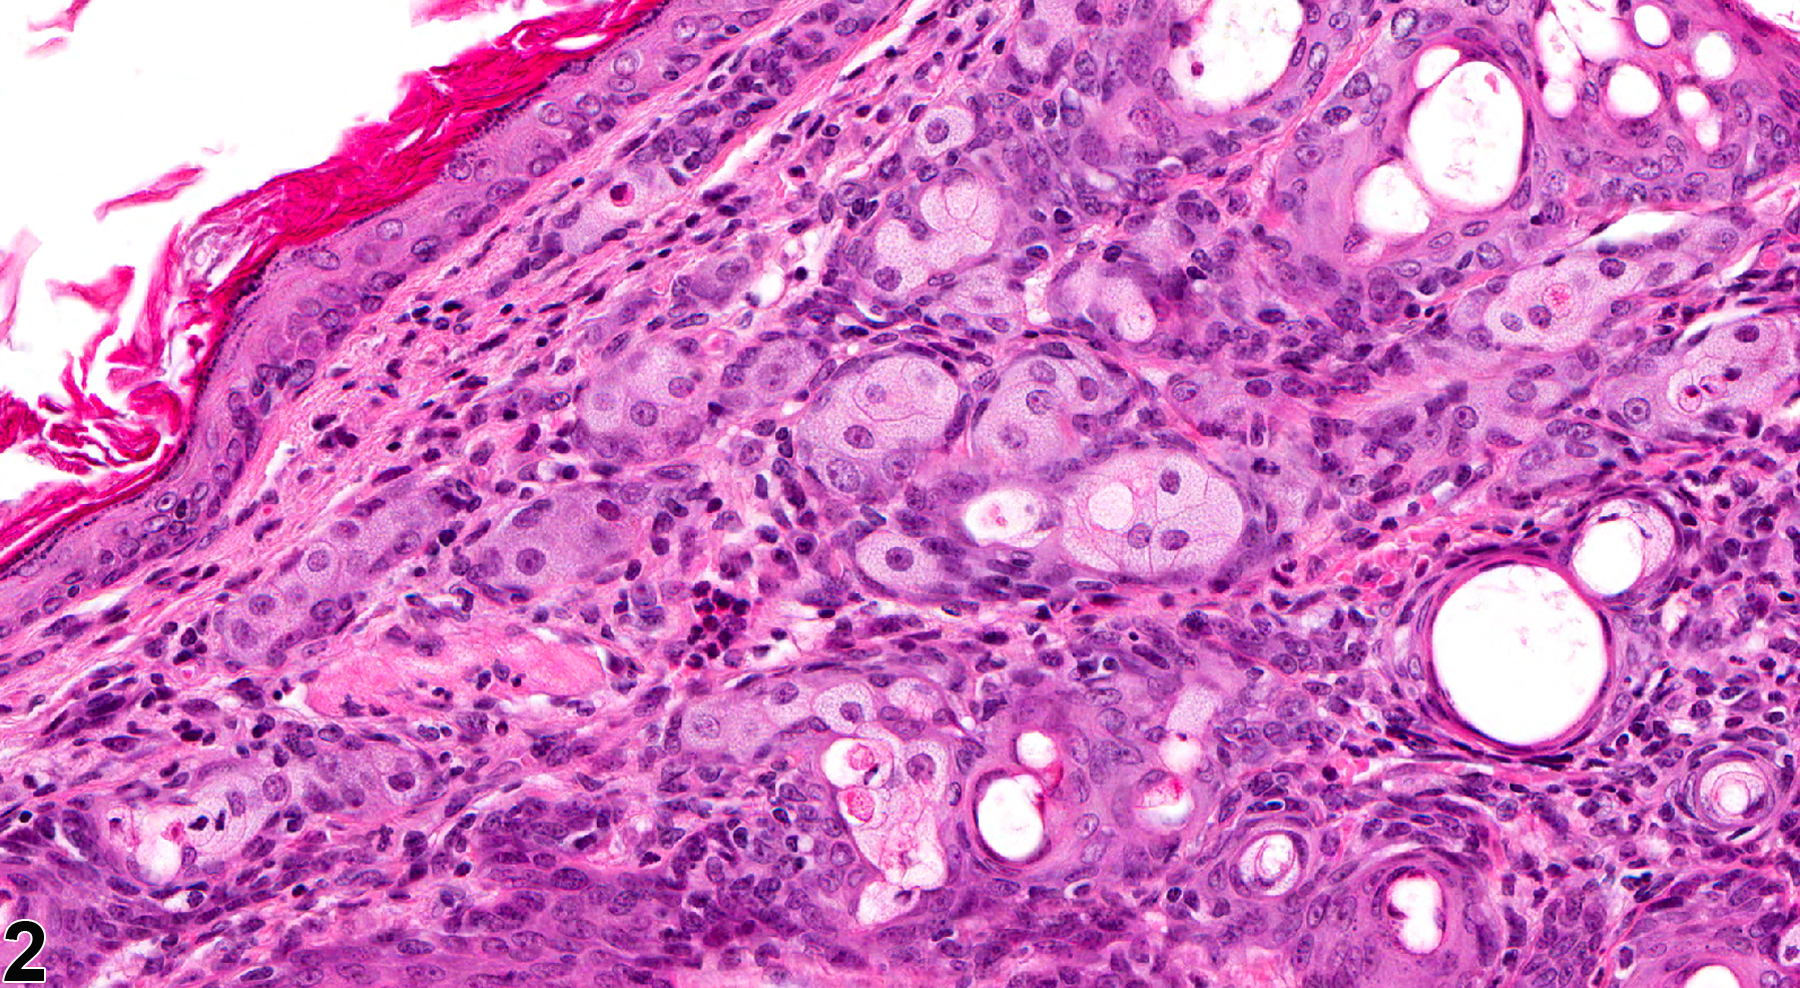 Image of inflammation in the Zymbal's gland from a male Tg.Ac (FVB/N) homozygous mouse in a subchronic study